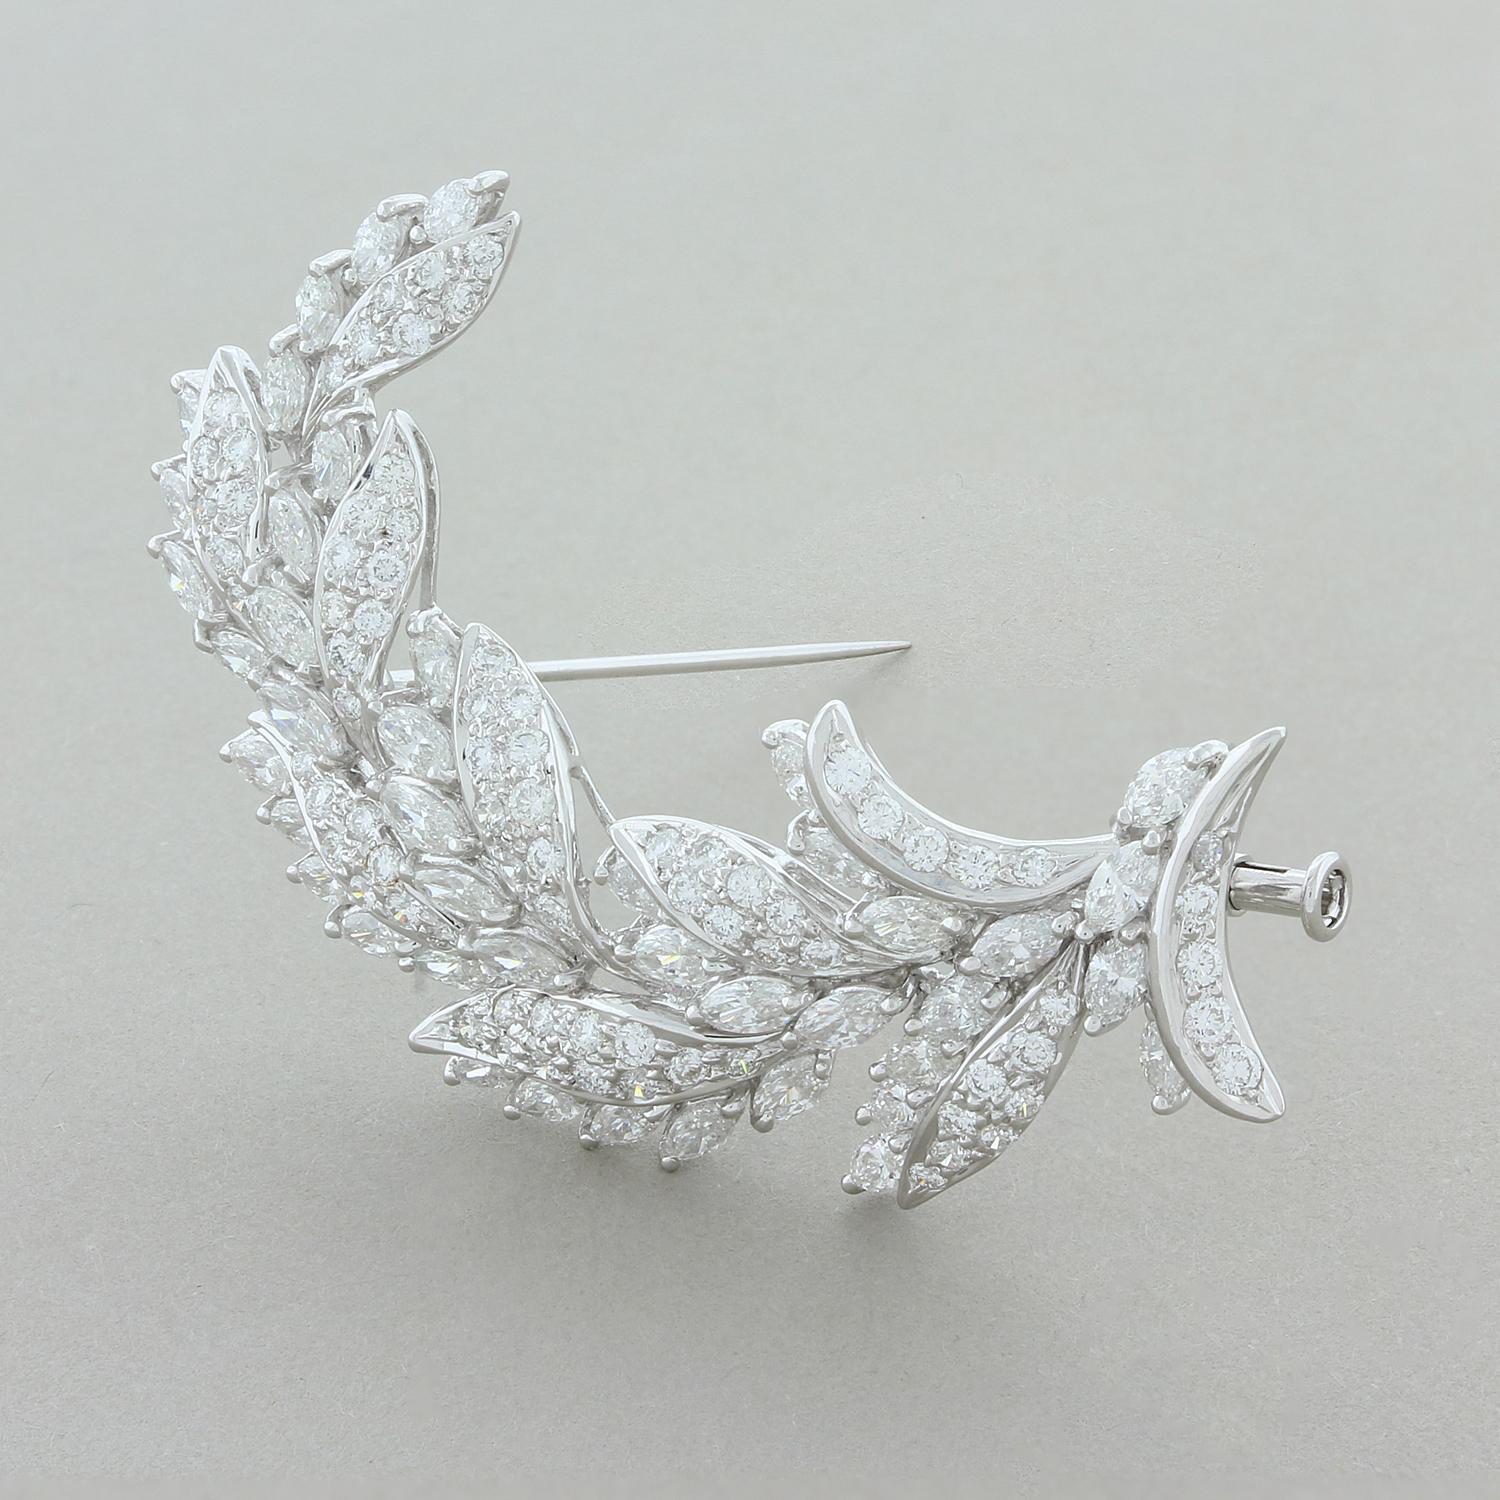 A magnificent brooch featuring 4.98 carats of VS quality marquise and round cut diamonds creating a stalk of wheat. Set in 18K white gold, the brooch curves up in design giving the piece a life-like look.

Brooch Length: 2.00 inches
Brooch Width: